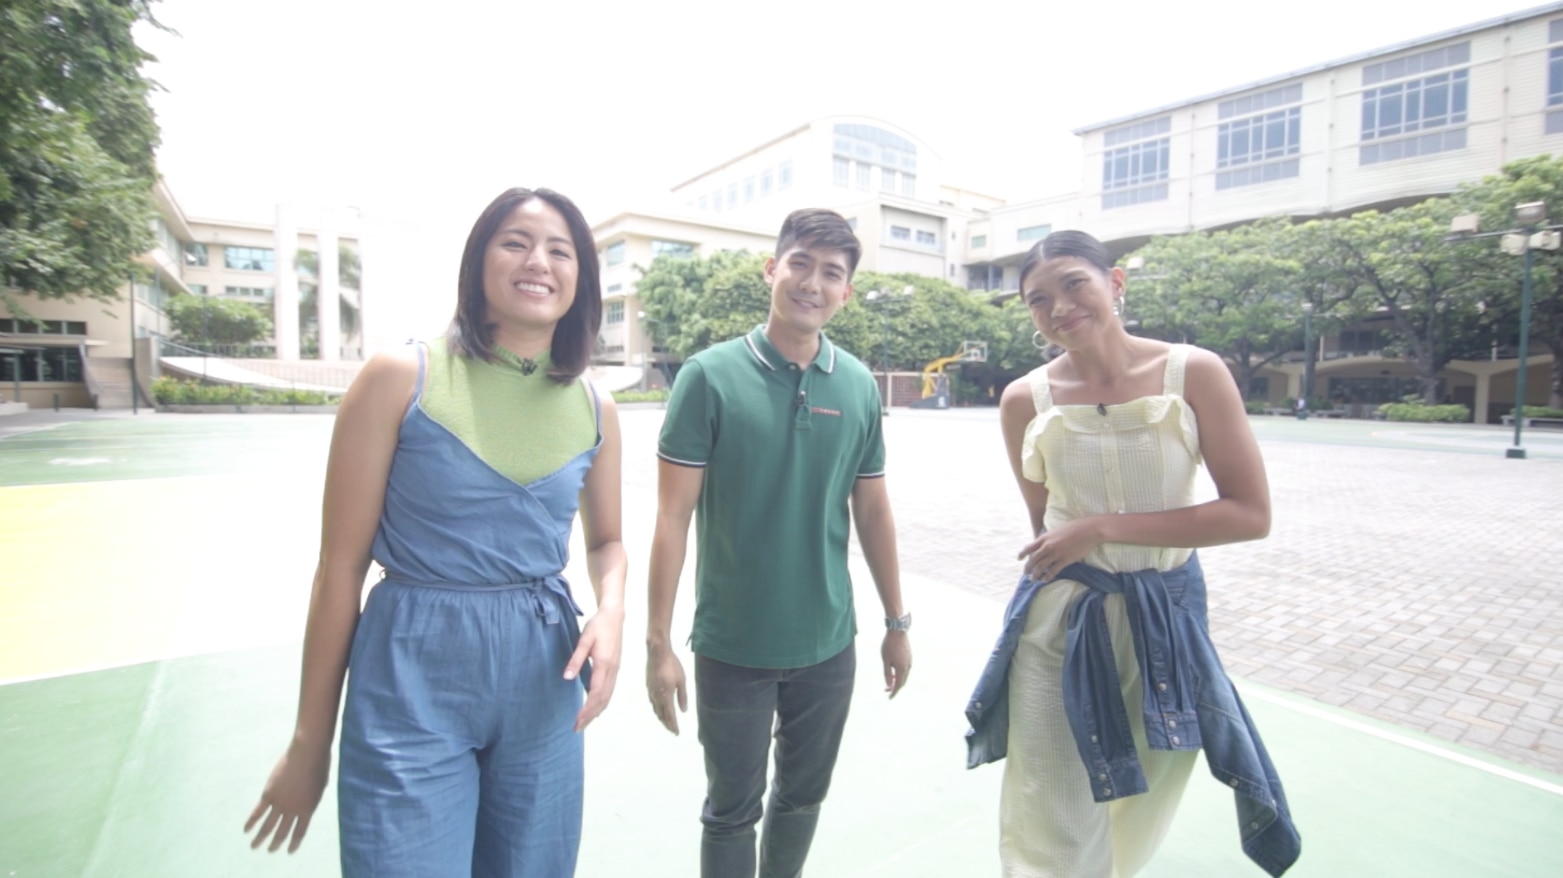 Robi, Gretchen, Alyssa, and other ABS CBN Sports hosts say goodbye to UTown and Upfront